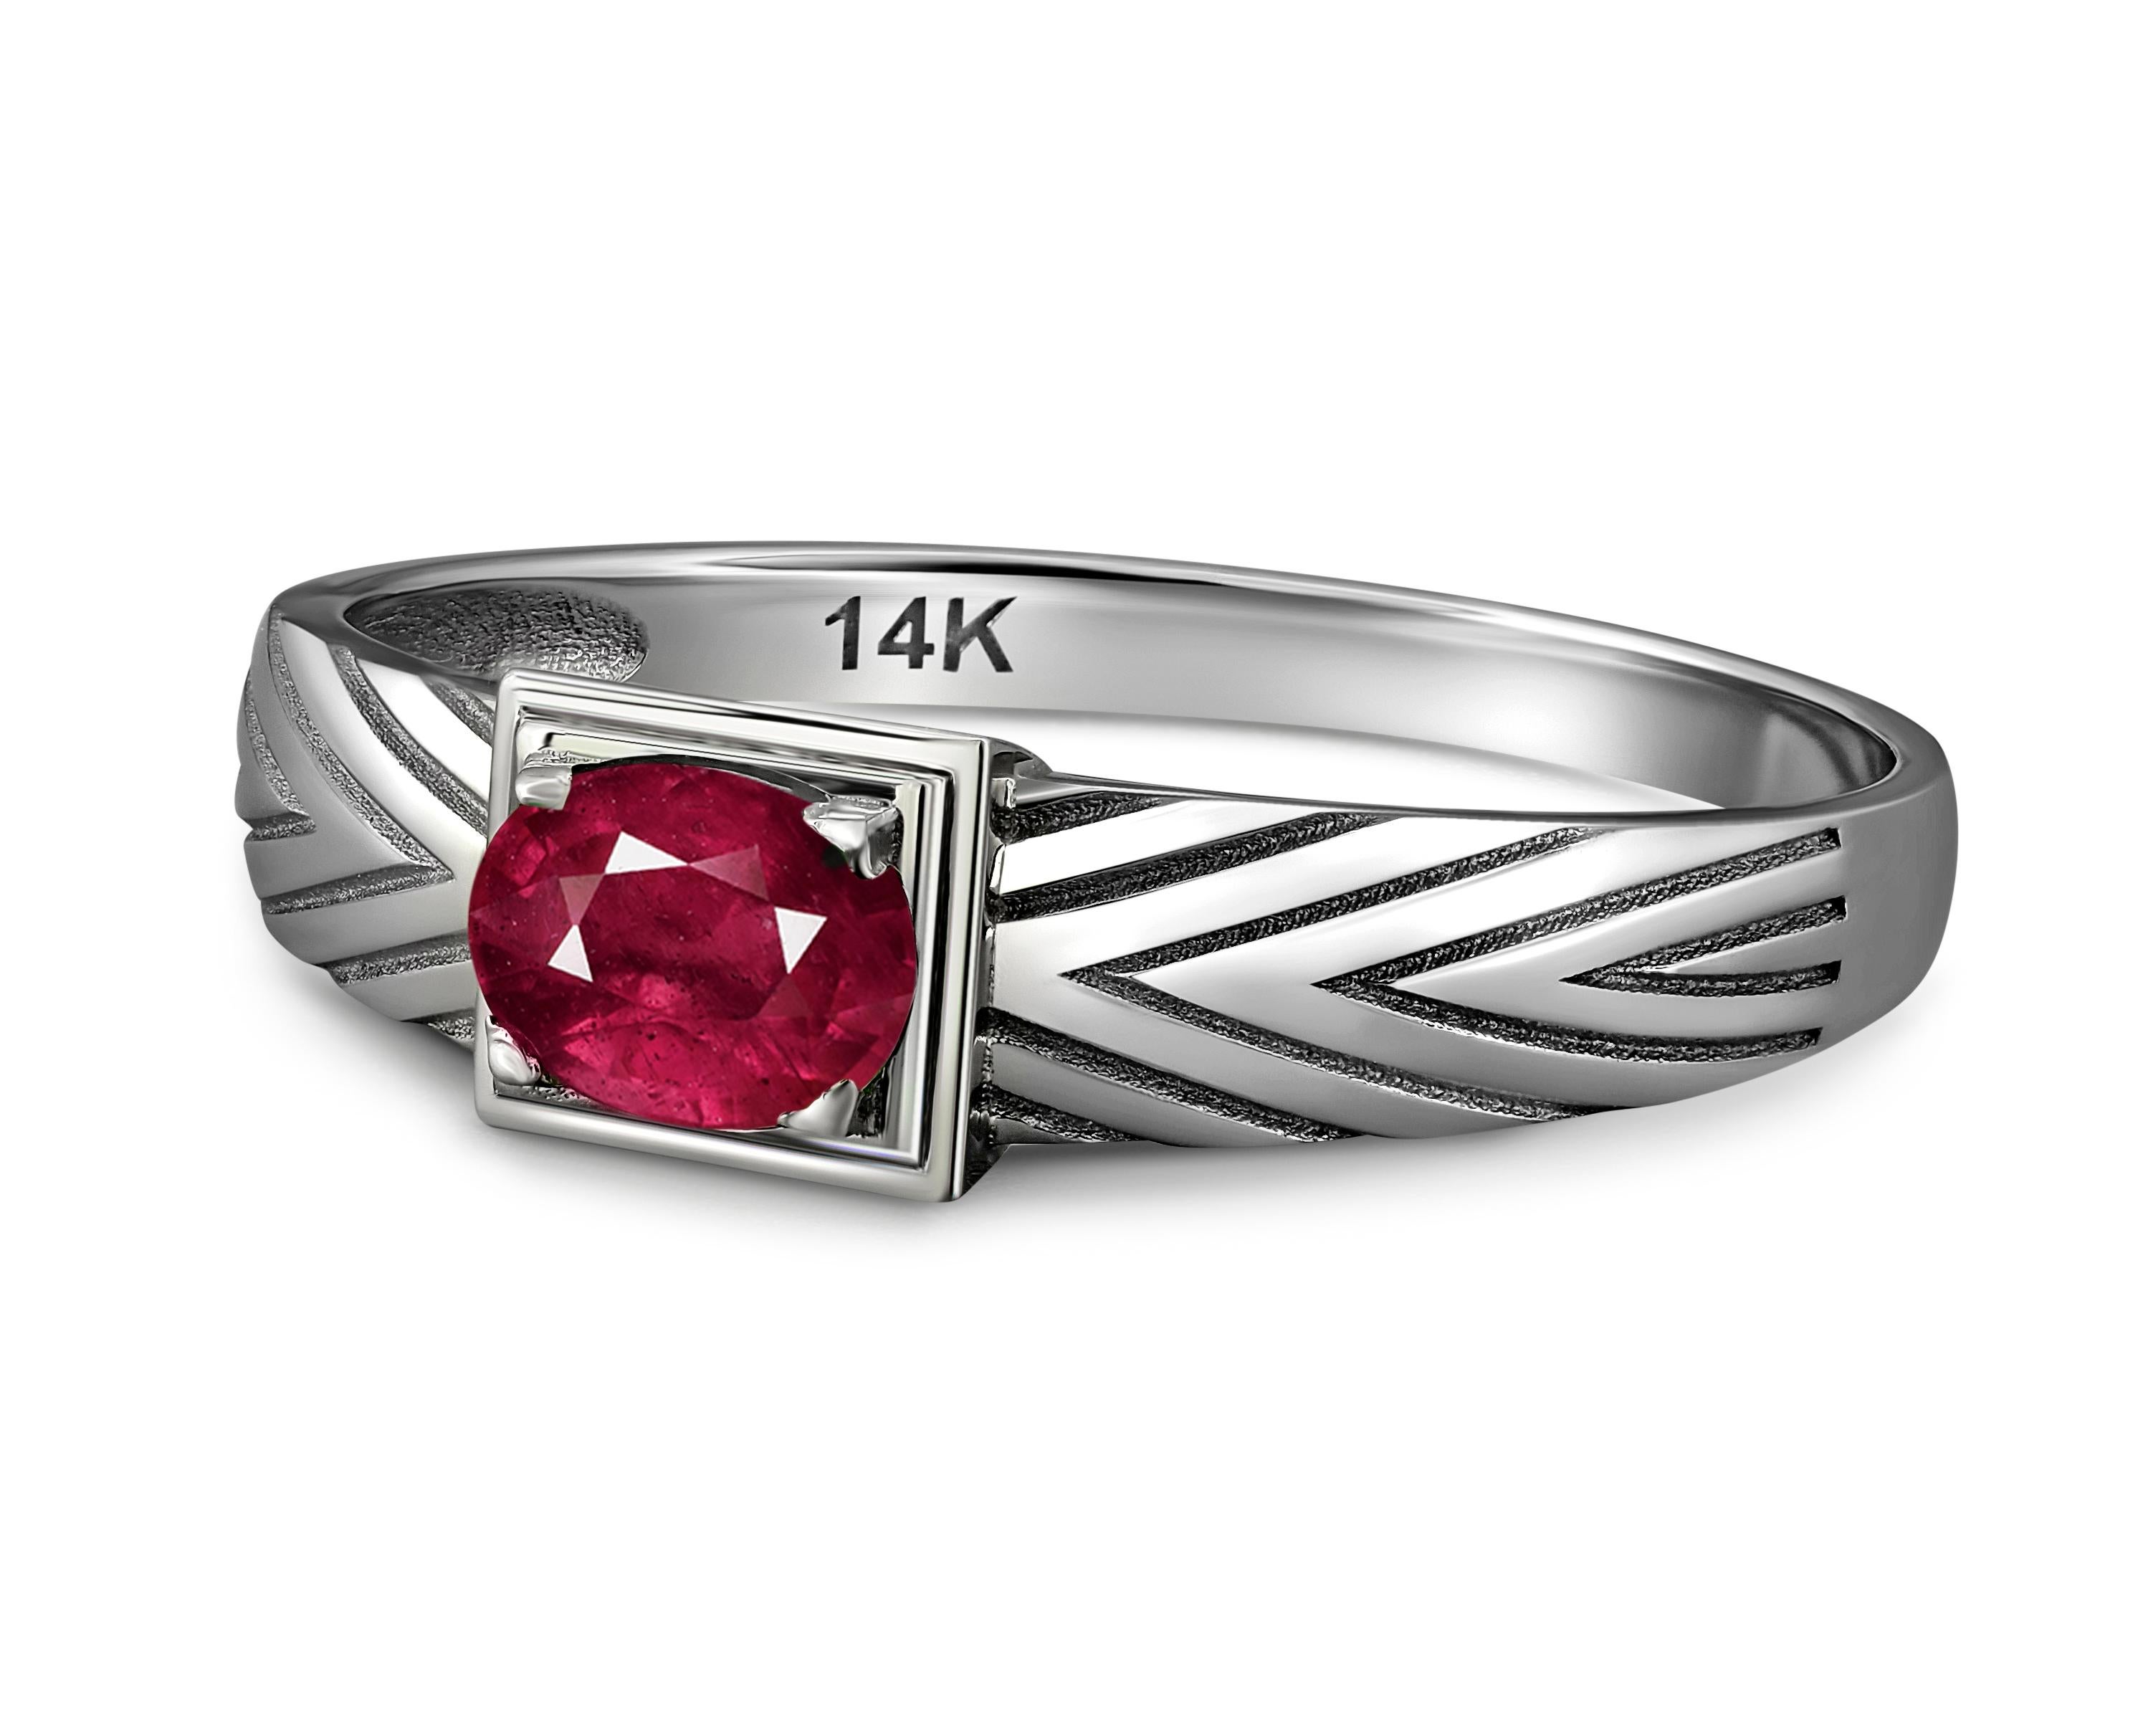 Oval Cut 14k Gold Mens Ring with Ruby, Gold Ring for Men with Ruby